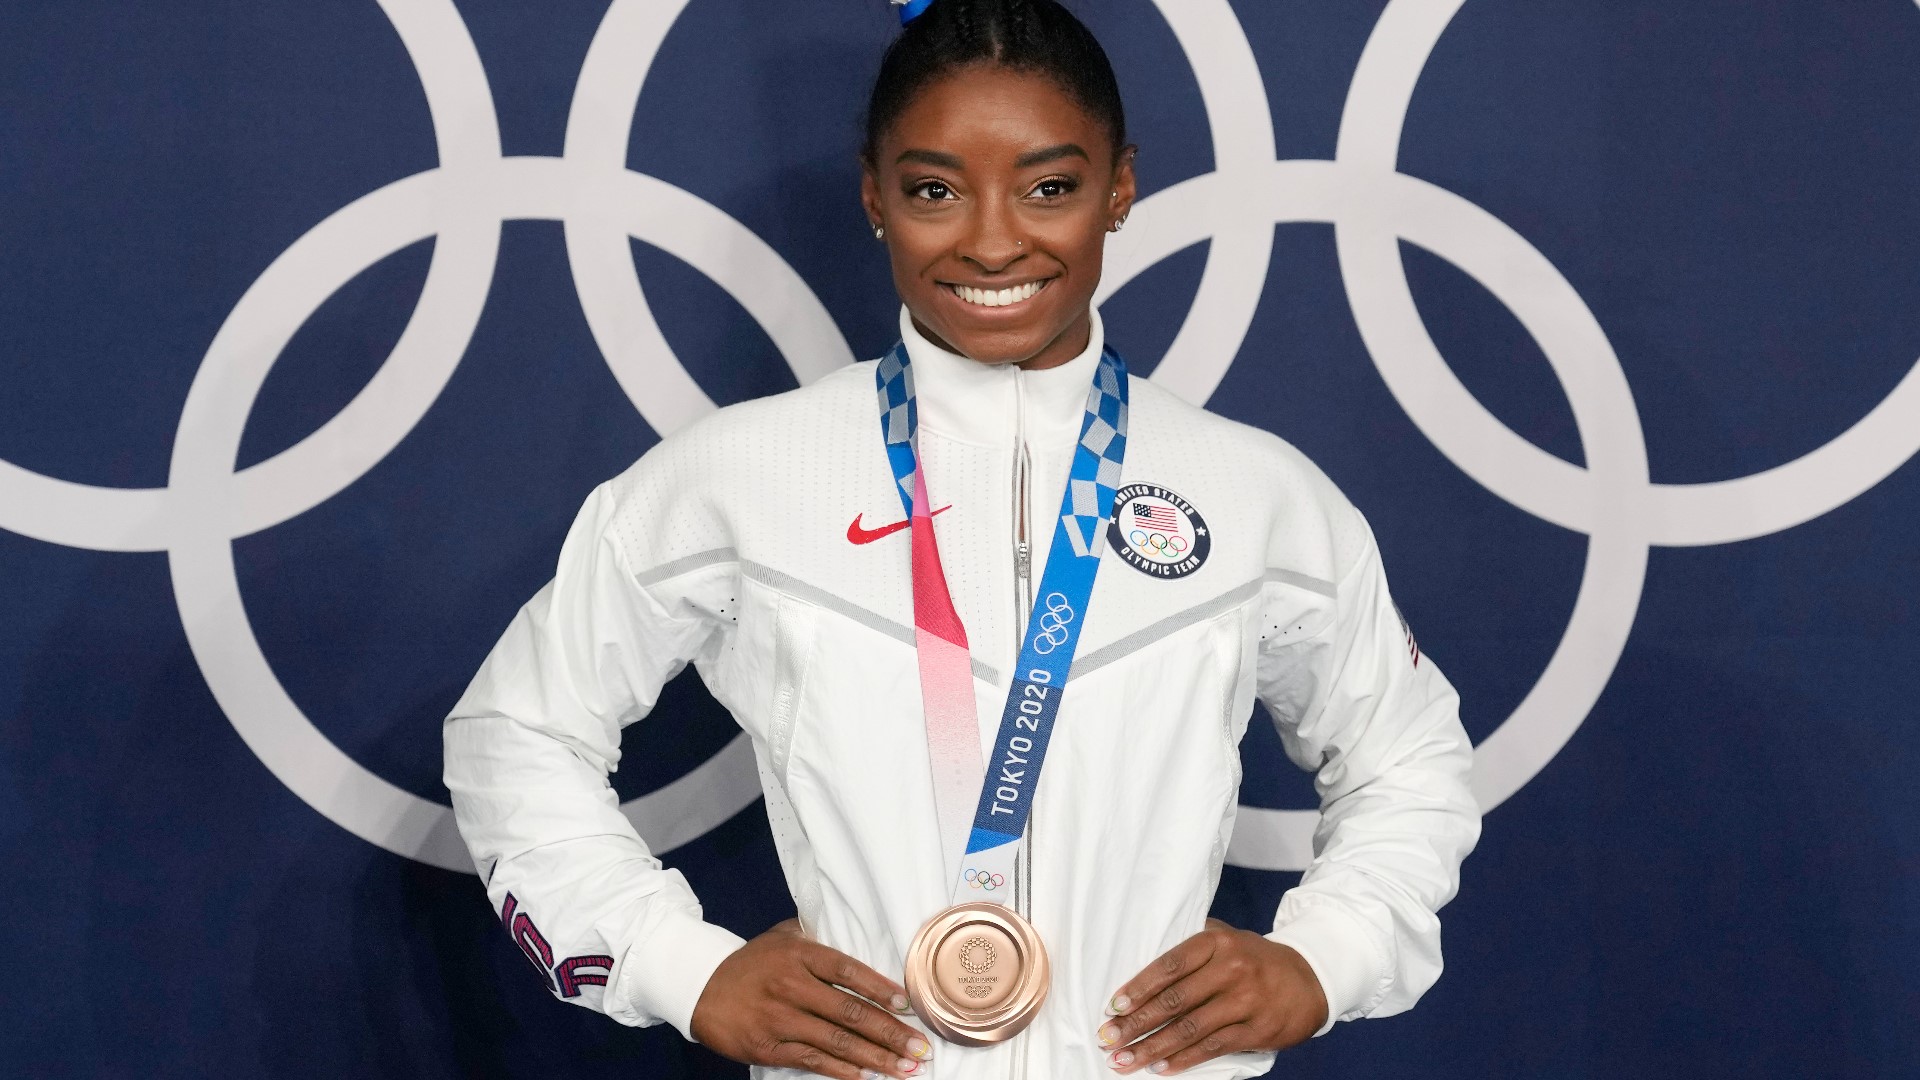 Simone Biles, Denzel Washington, and the late Steve Jobs are some of the many that'll be given the highest civilian honor.